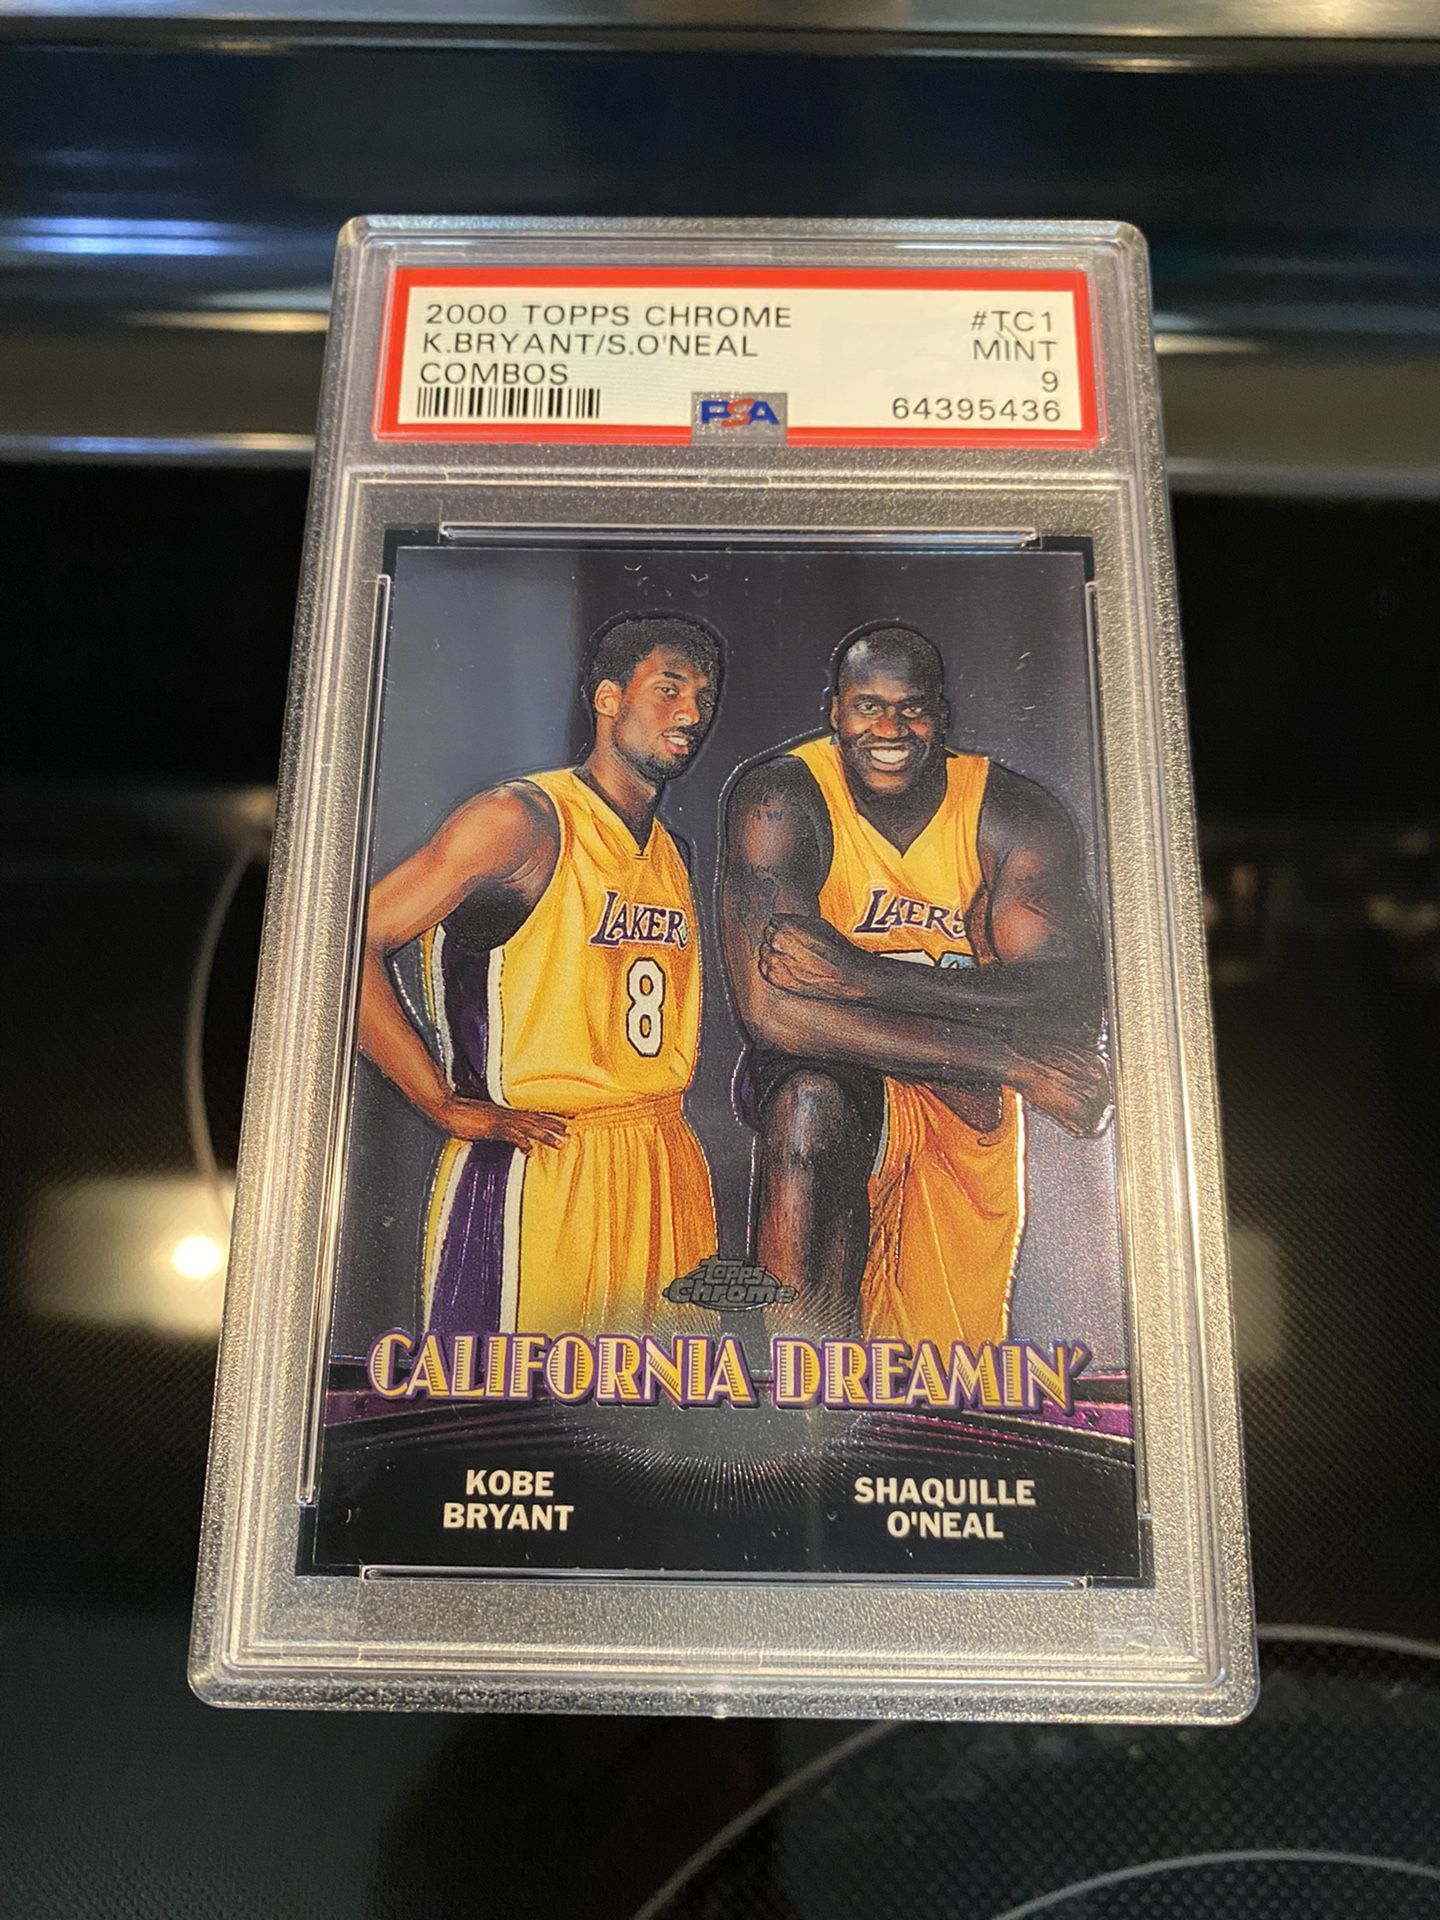 2000 Topps Chrome Combos - Kobe Bryant & Shaquille O’Neal - California Dreamin’ - RARE PSA 9 MINT 💎 - See My Listings For More ! - $999 OBO